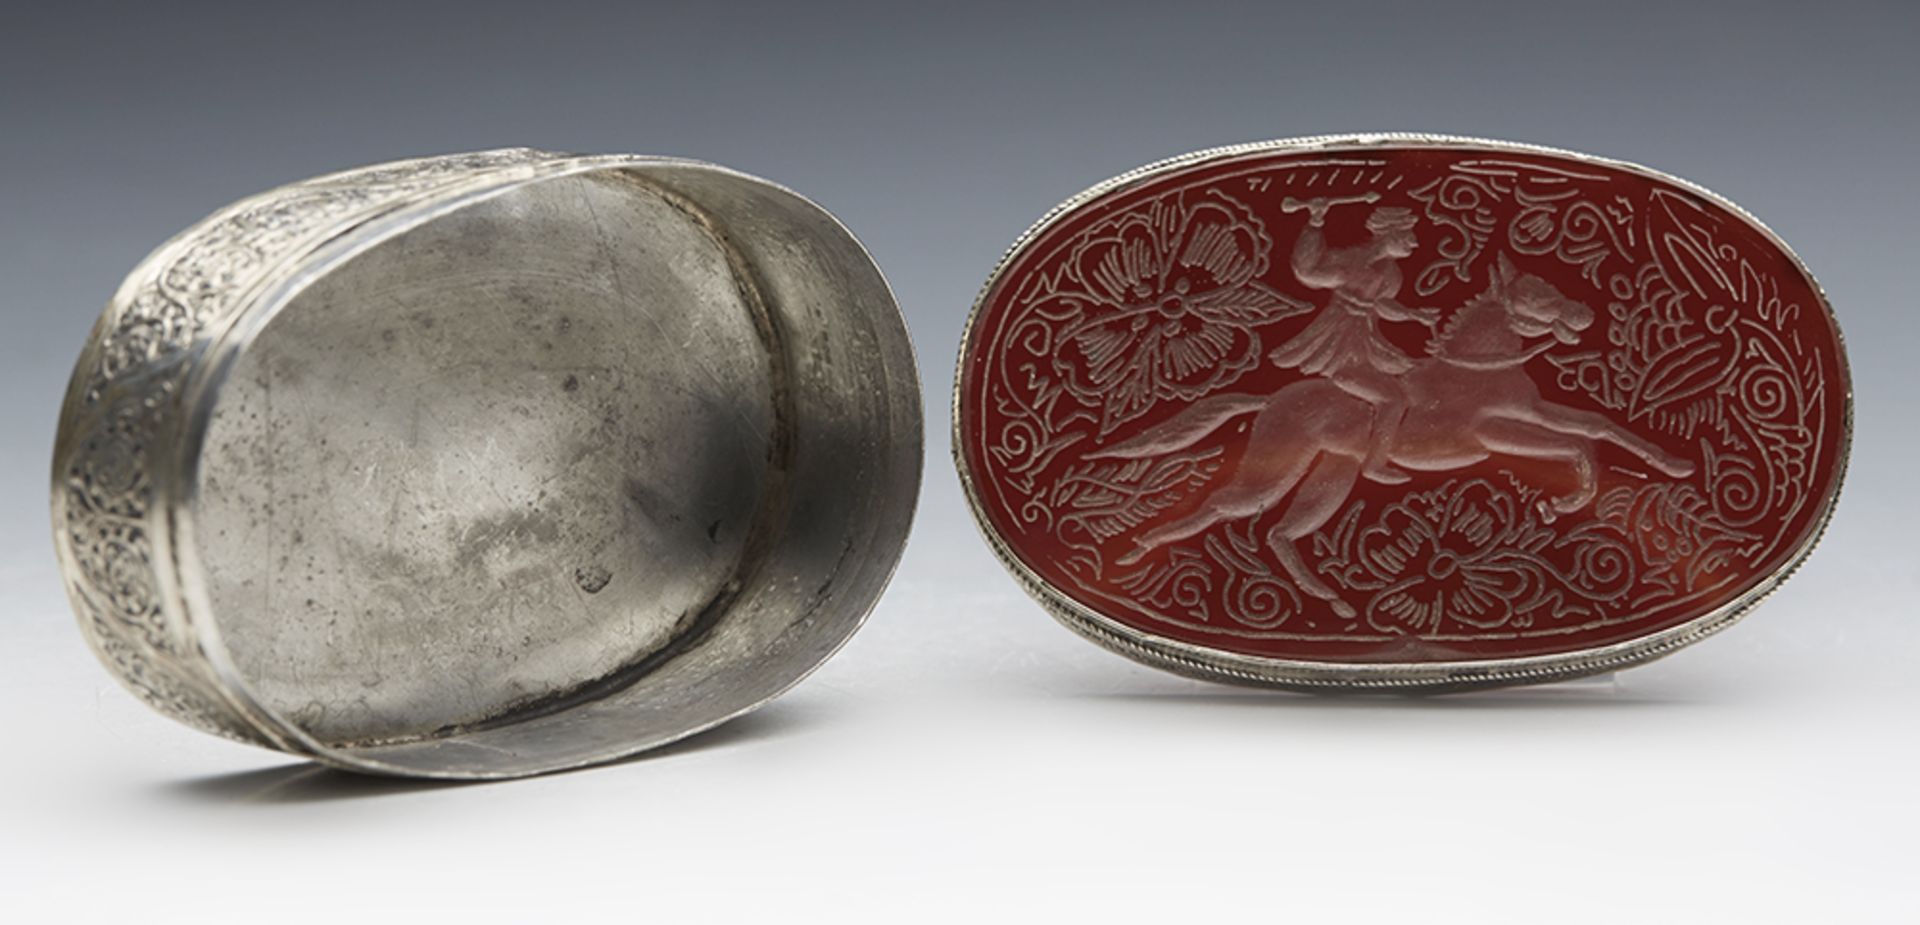 Antique Indian Silver Lidded Box With Carved Intaglio Stone Top 19Th C. - Image 6 of 7